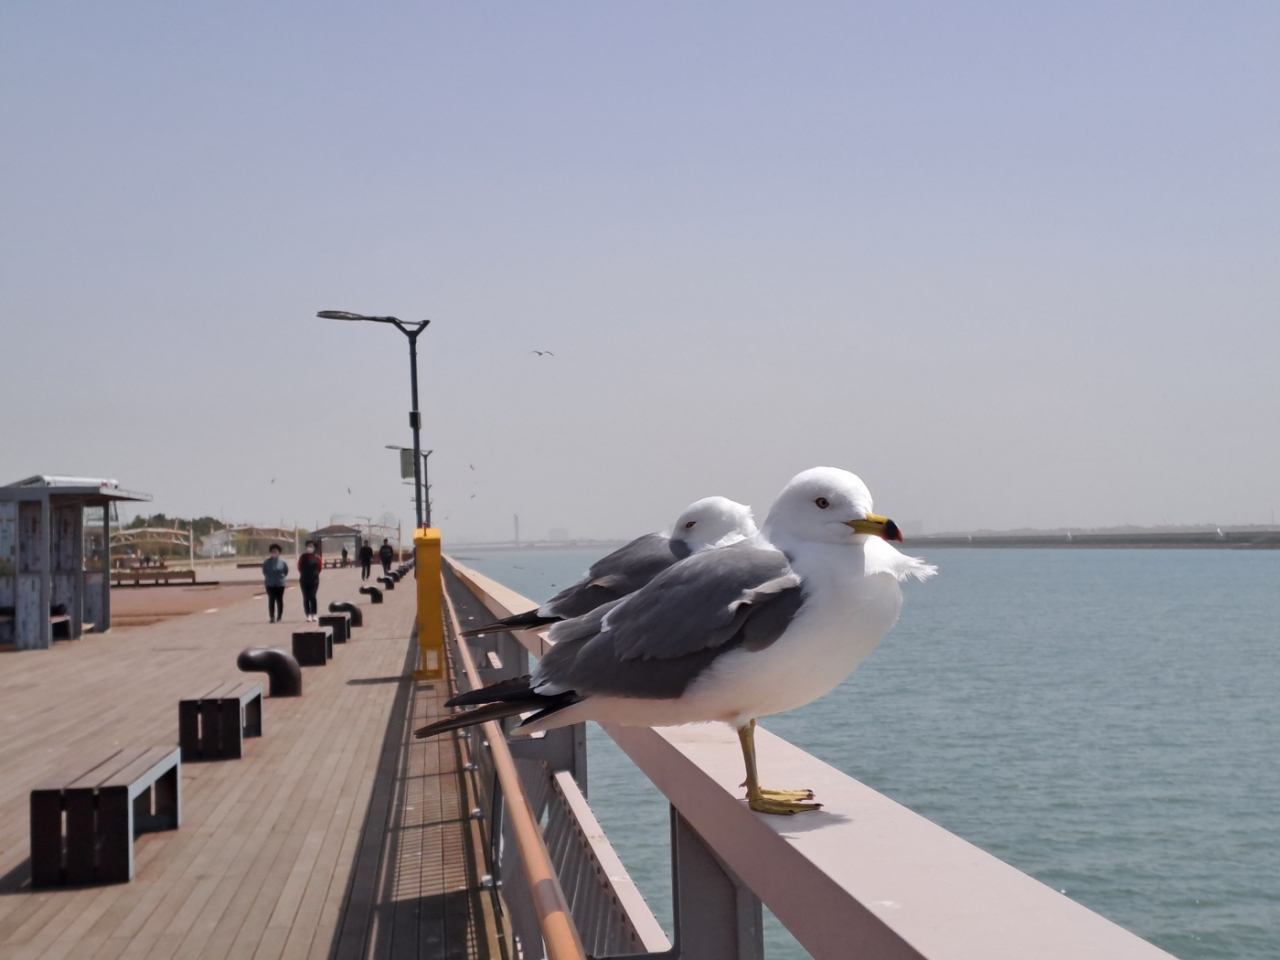 Seagulls rest on a handrail at Solchan Park. (Lee Si-jin/The Korea Herald)